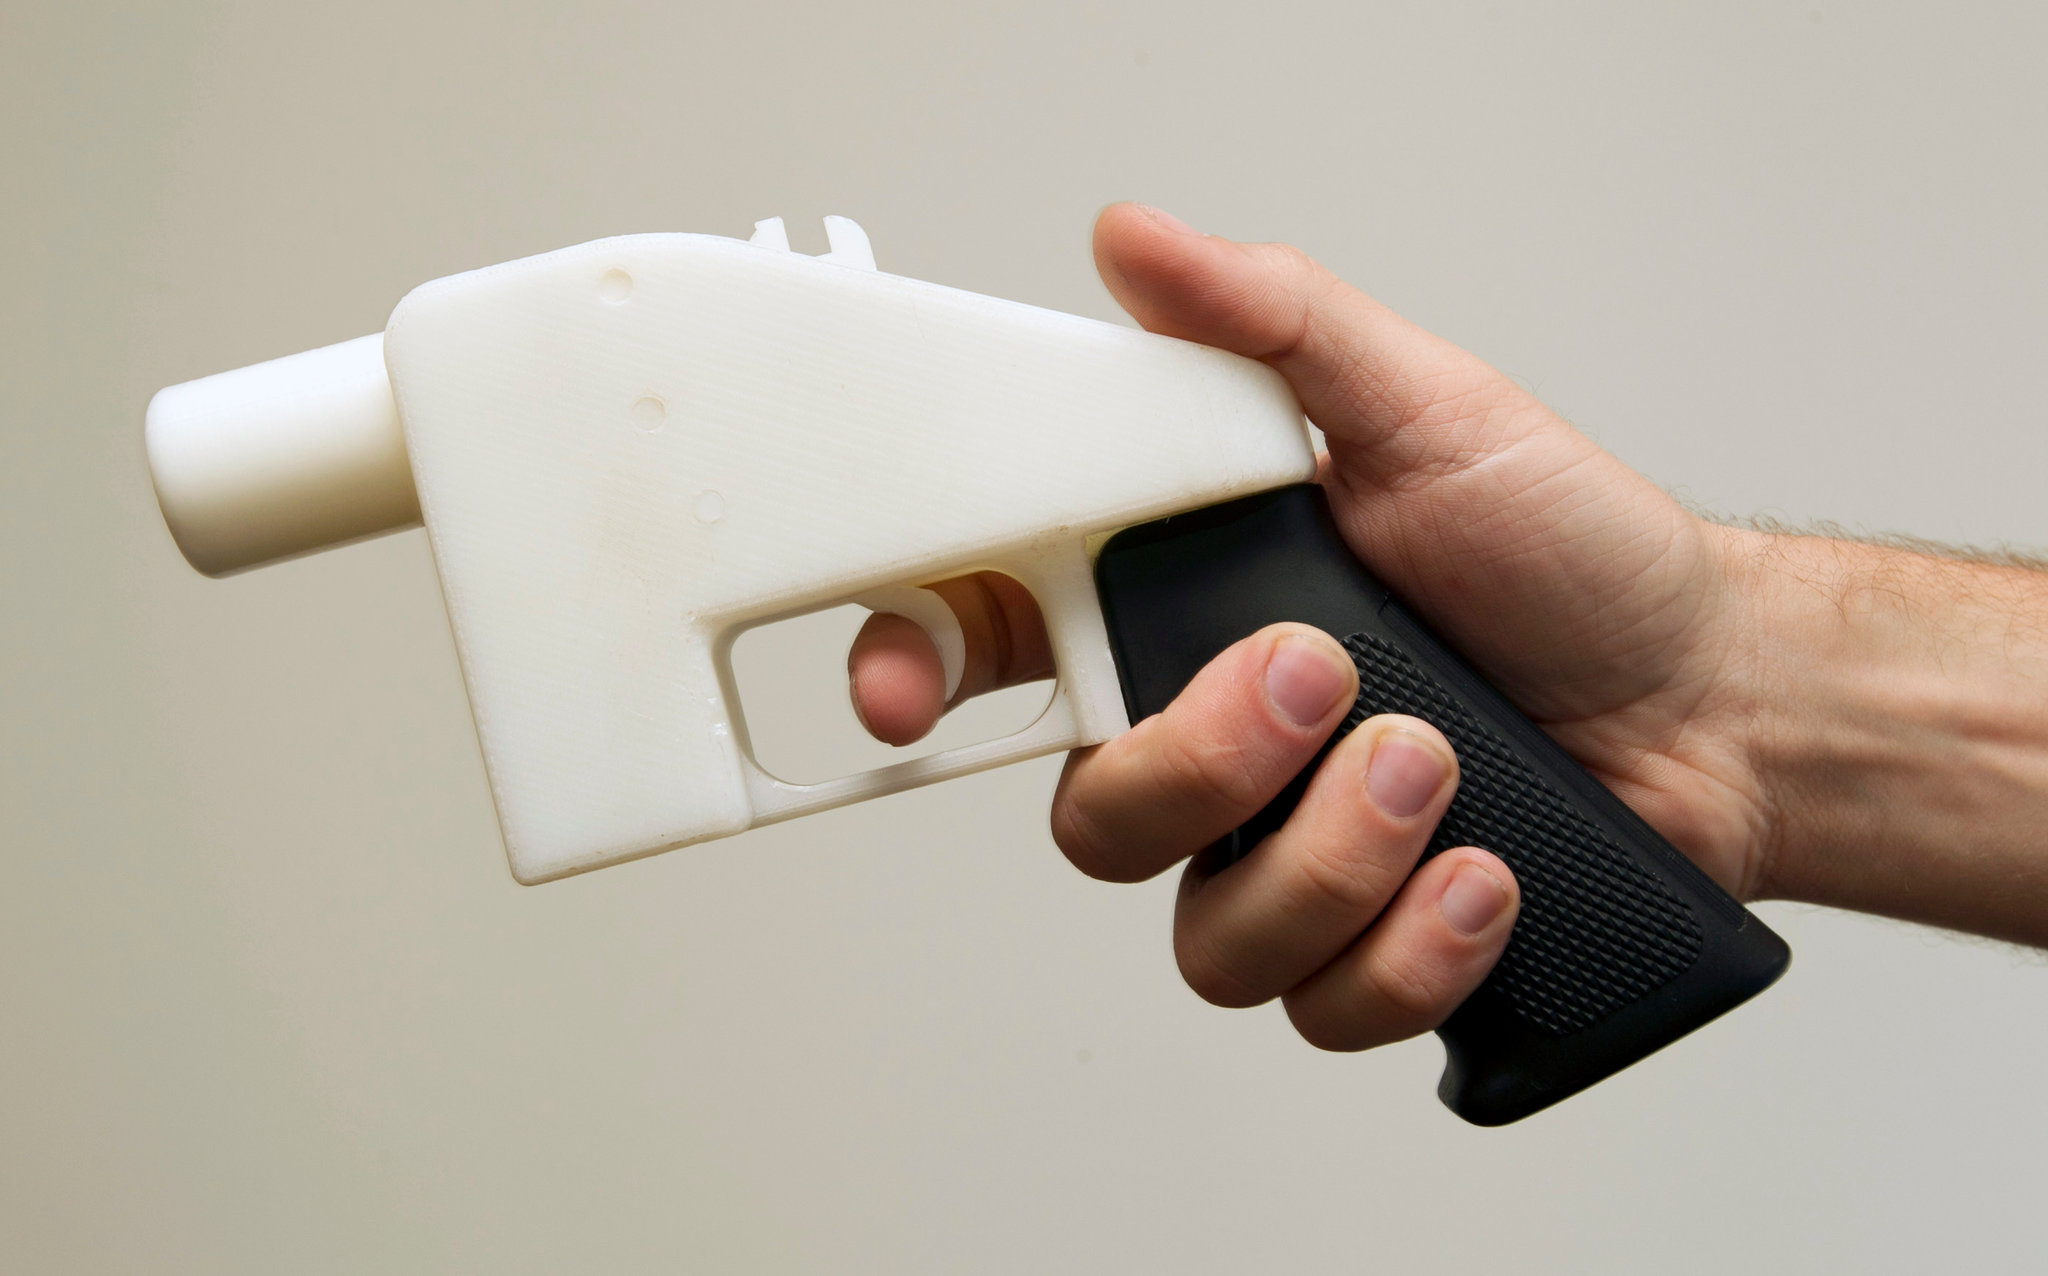 T&T told criminals using 3D printed gun parts to convert their weapons